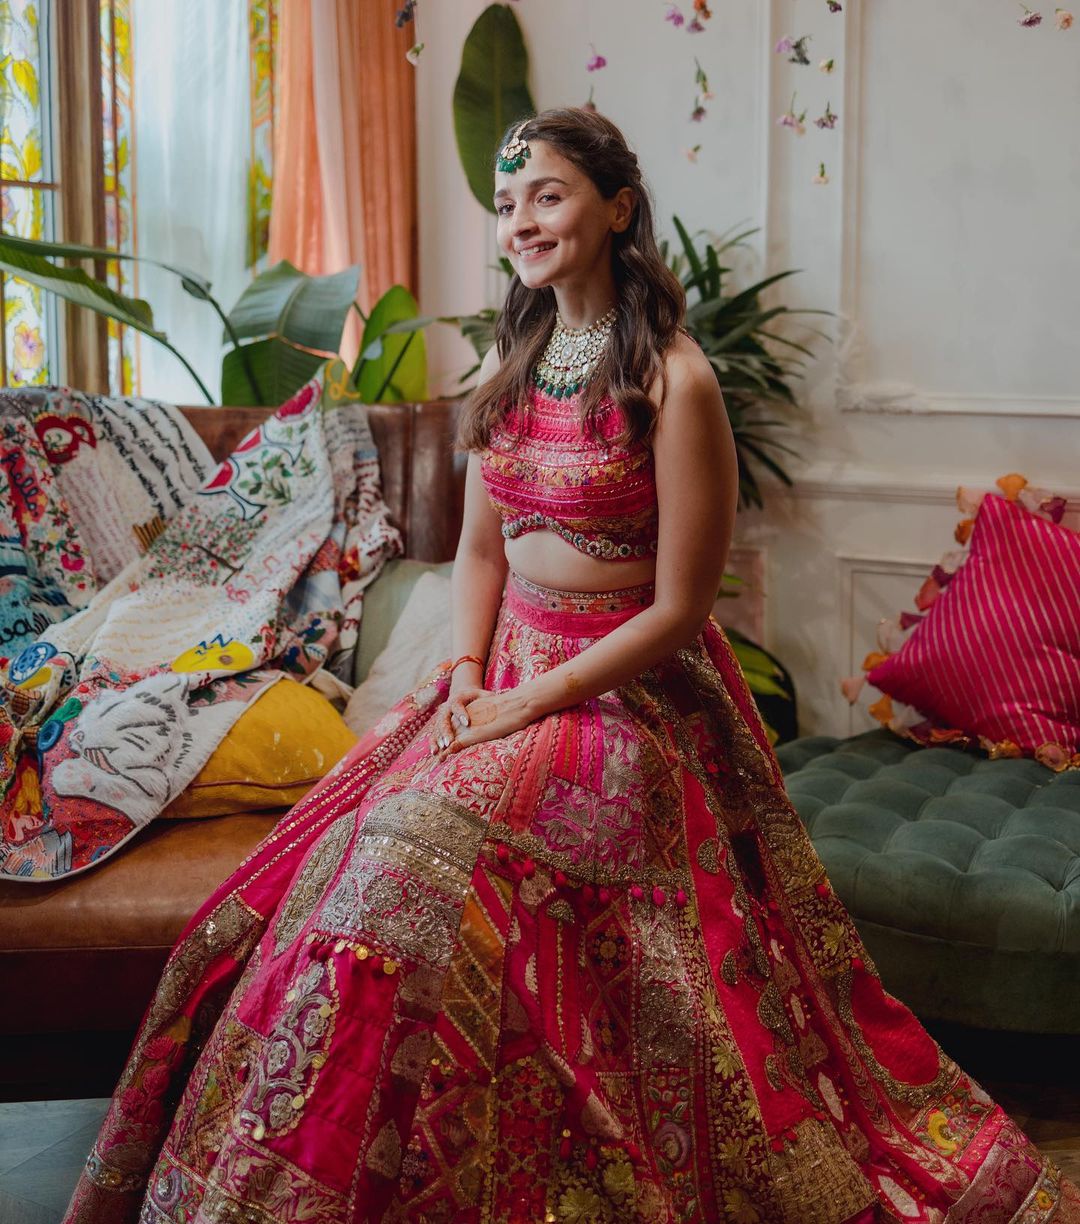 Kareena Kapoor Khan Looks Ethereal In A Shimmery Silver Lehenga At Alia  Bhatt & Ranbir Kapoor's Mehendi, Netizens React, “Only Product Of Nepotism  Who Is Talented”